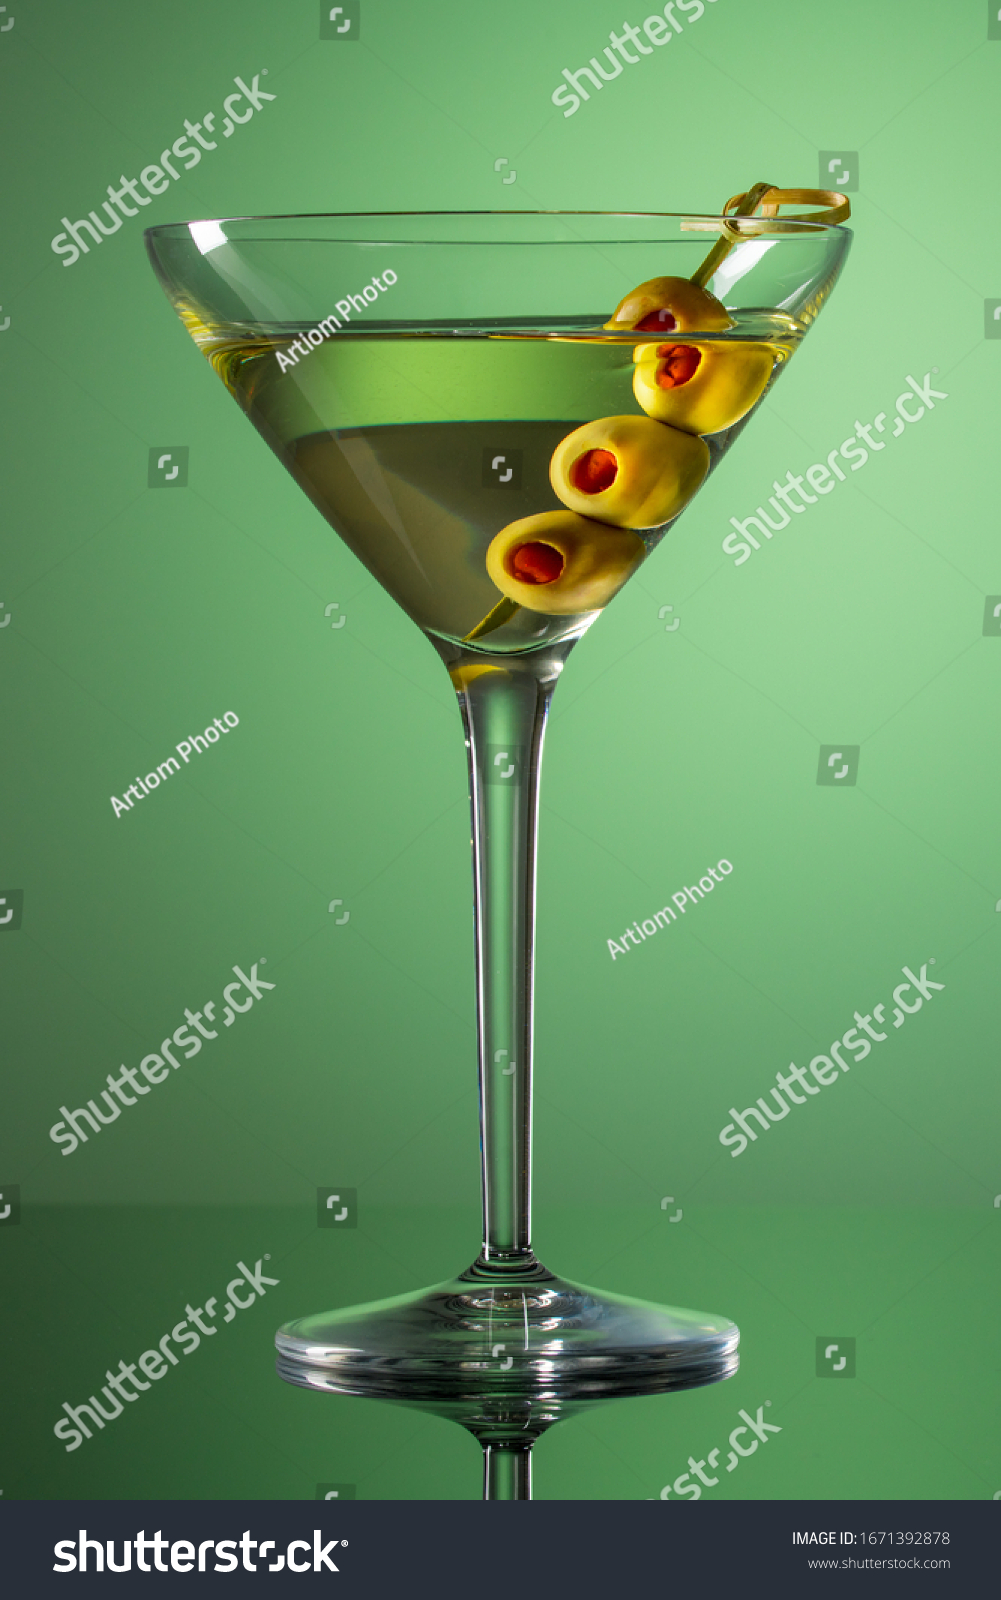 Glass of Martini with olives. Extra dry vermouth martini. Alcohol cocktail on green background.  #1671392878